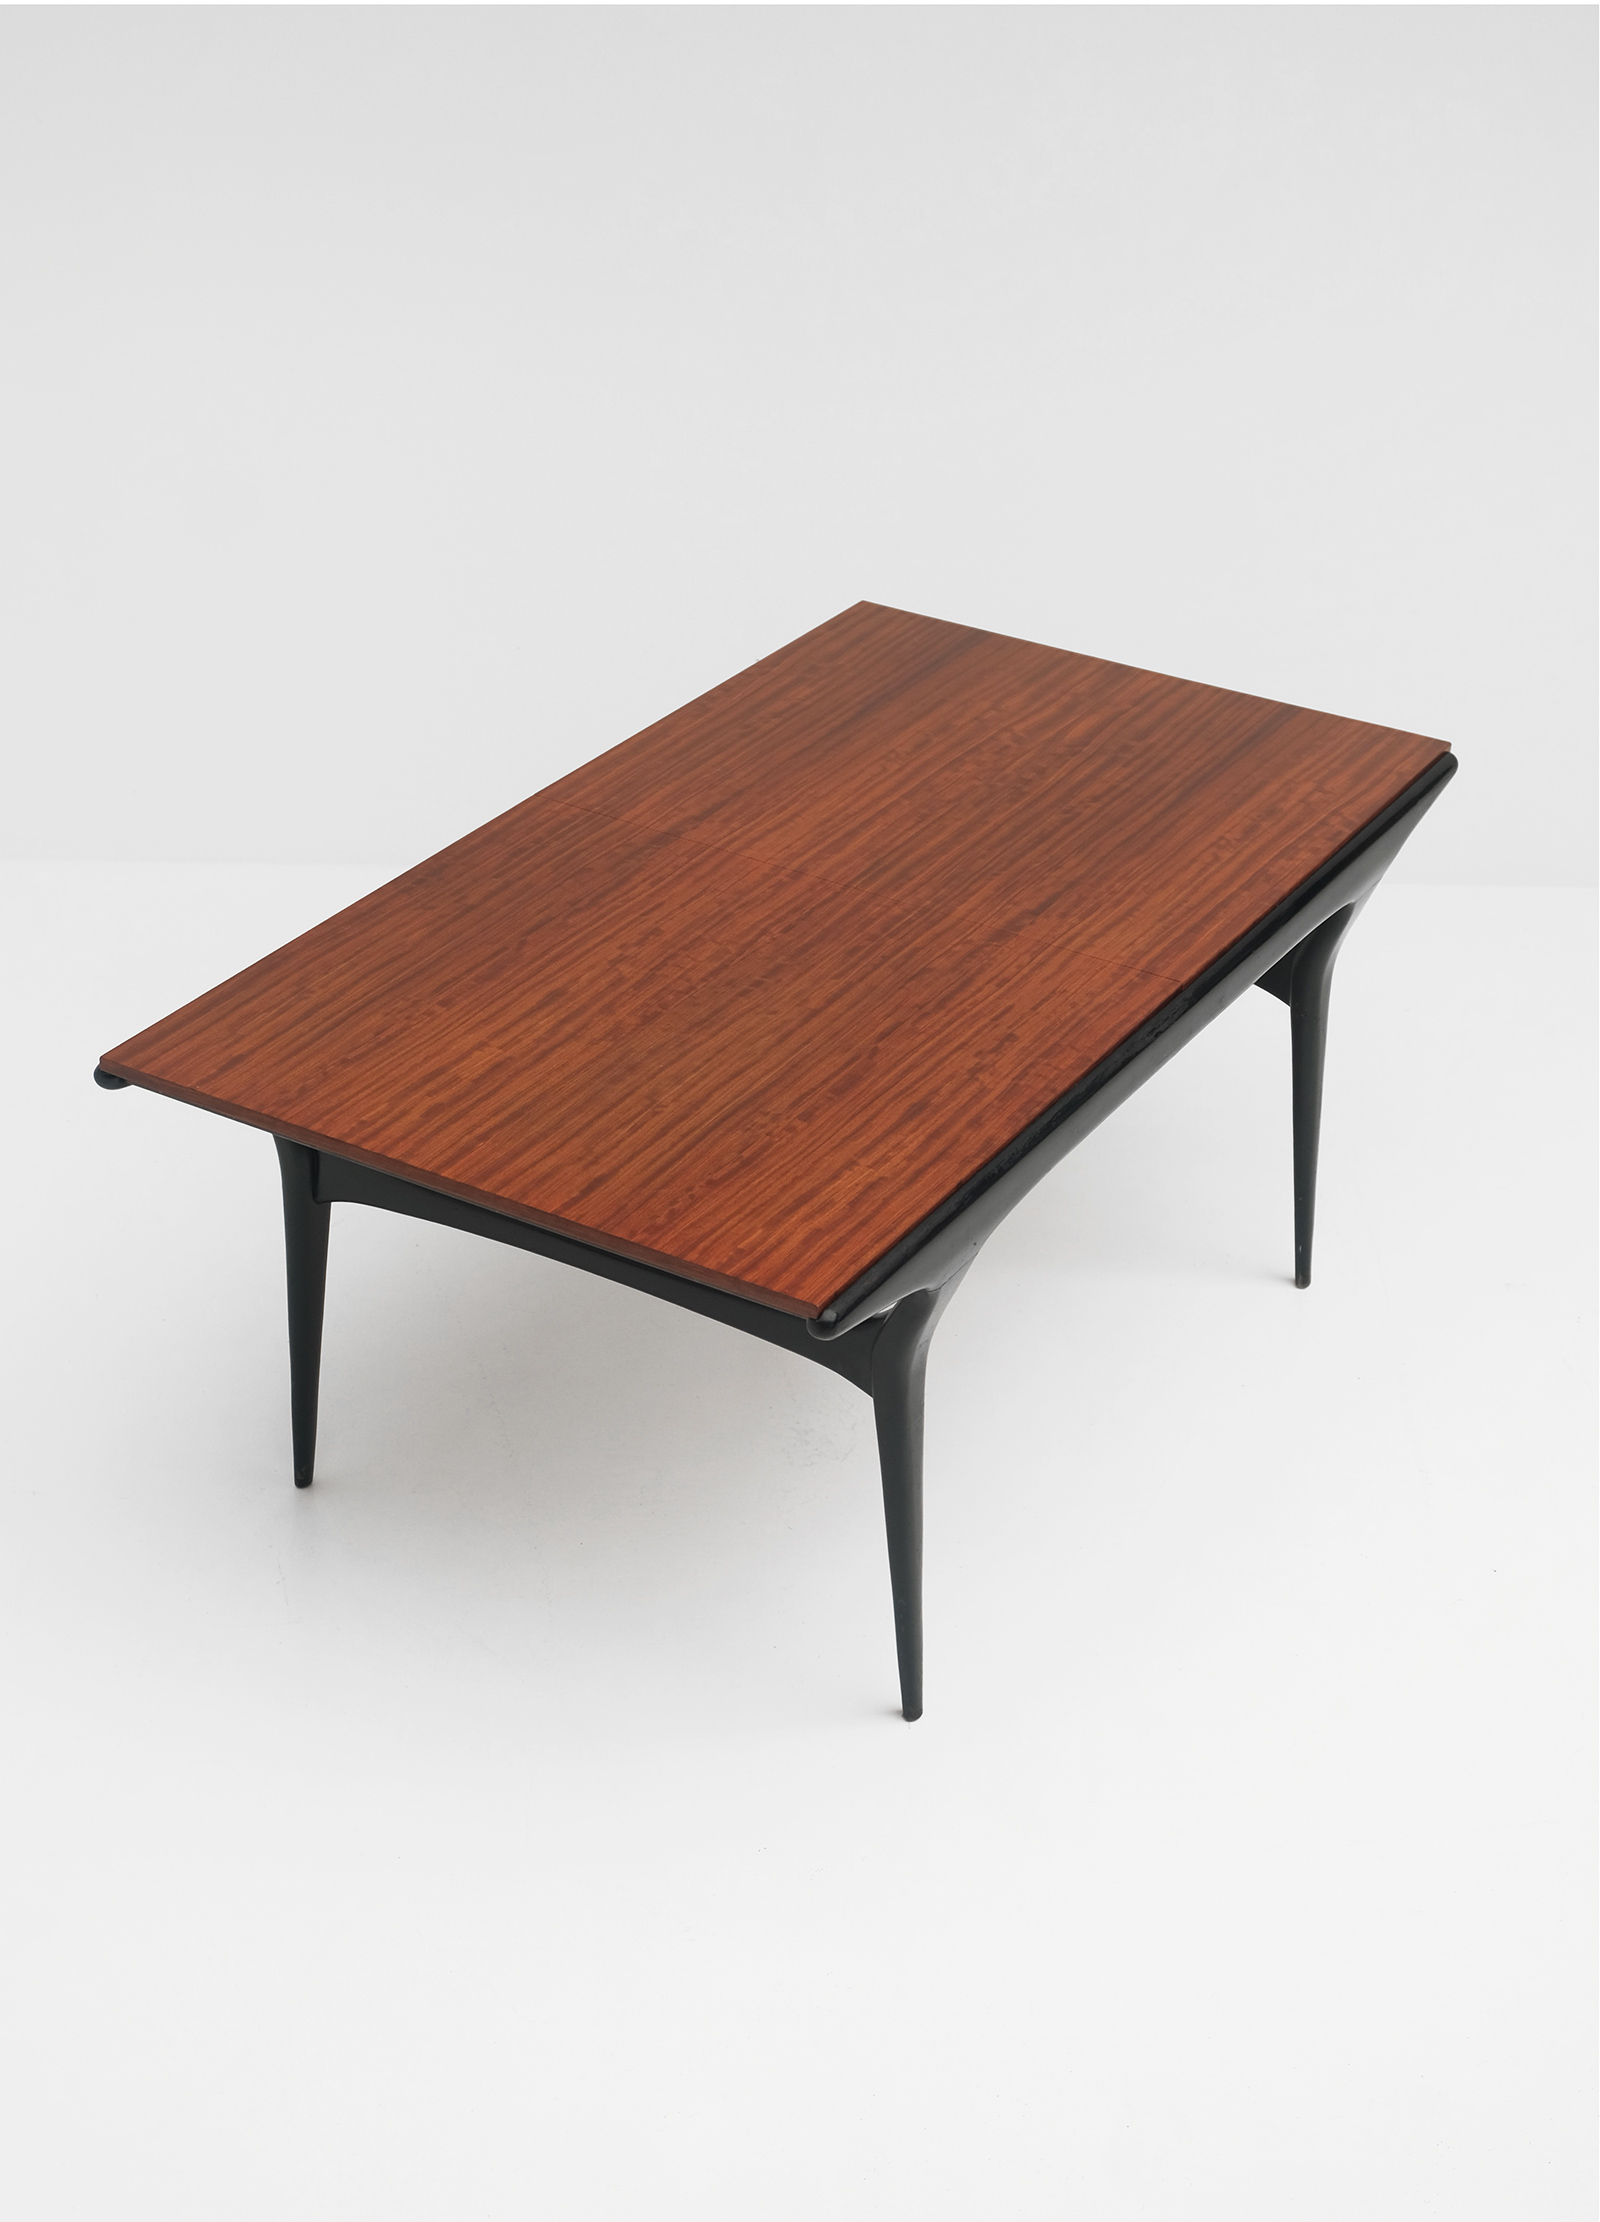 Alfred Hendrickx rare Belform Dining Table 1950simage 5